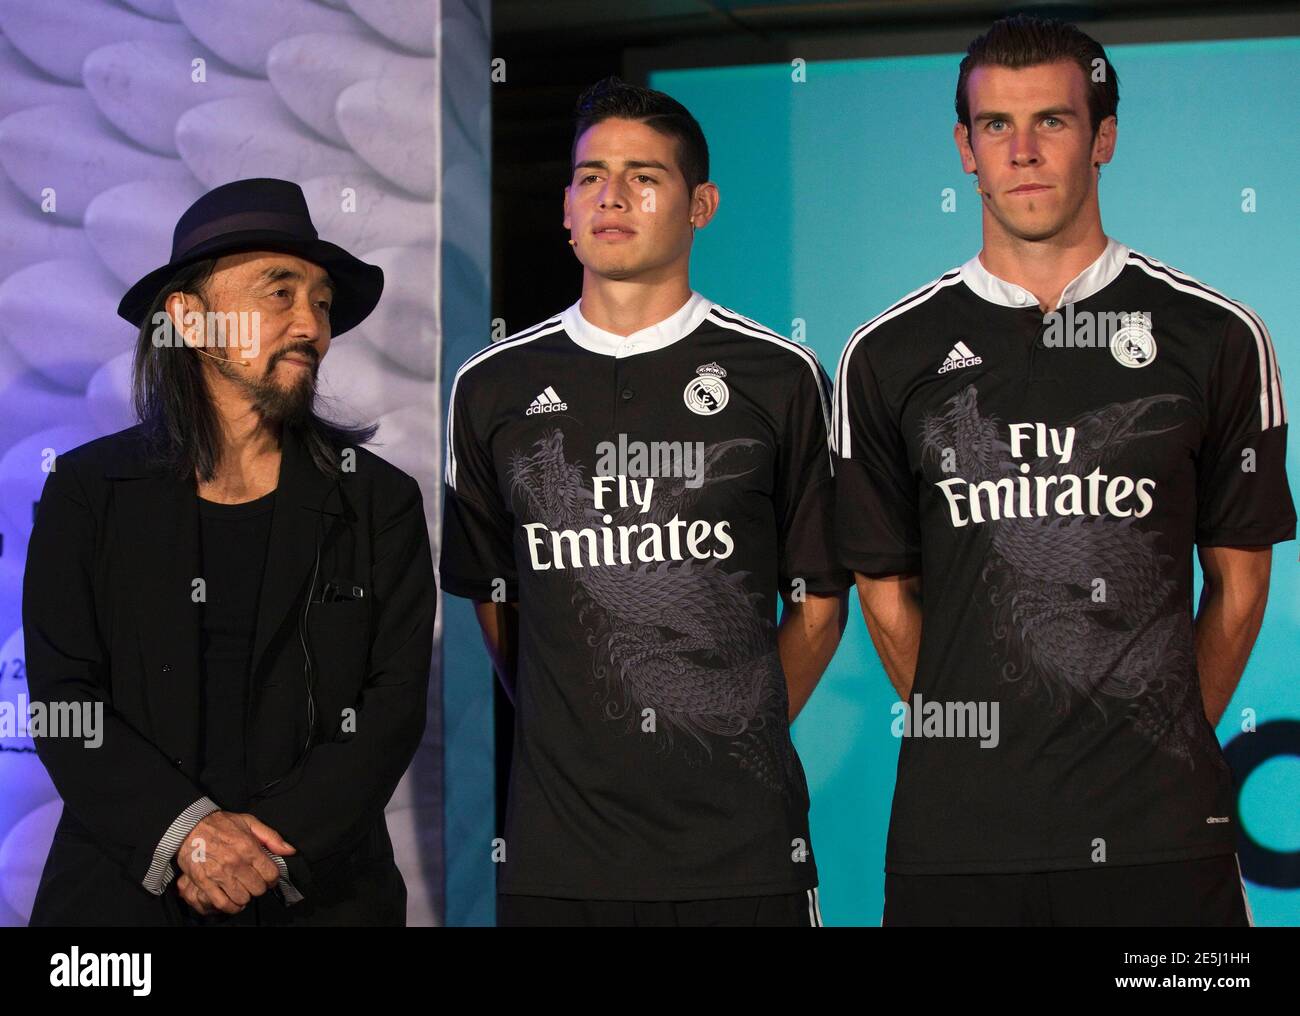 Real Madrid's Gareth Bale (R) and James pose along with Japanese designer Yohji (L) during the launching ceremony of the team's new UEFA Champions League kit at Santiago Bernabeu stadium